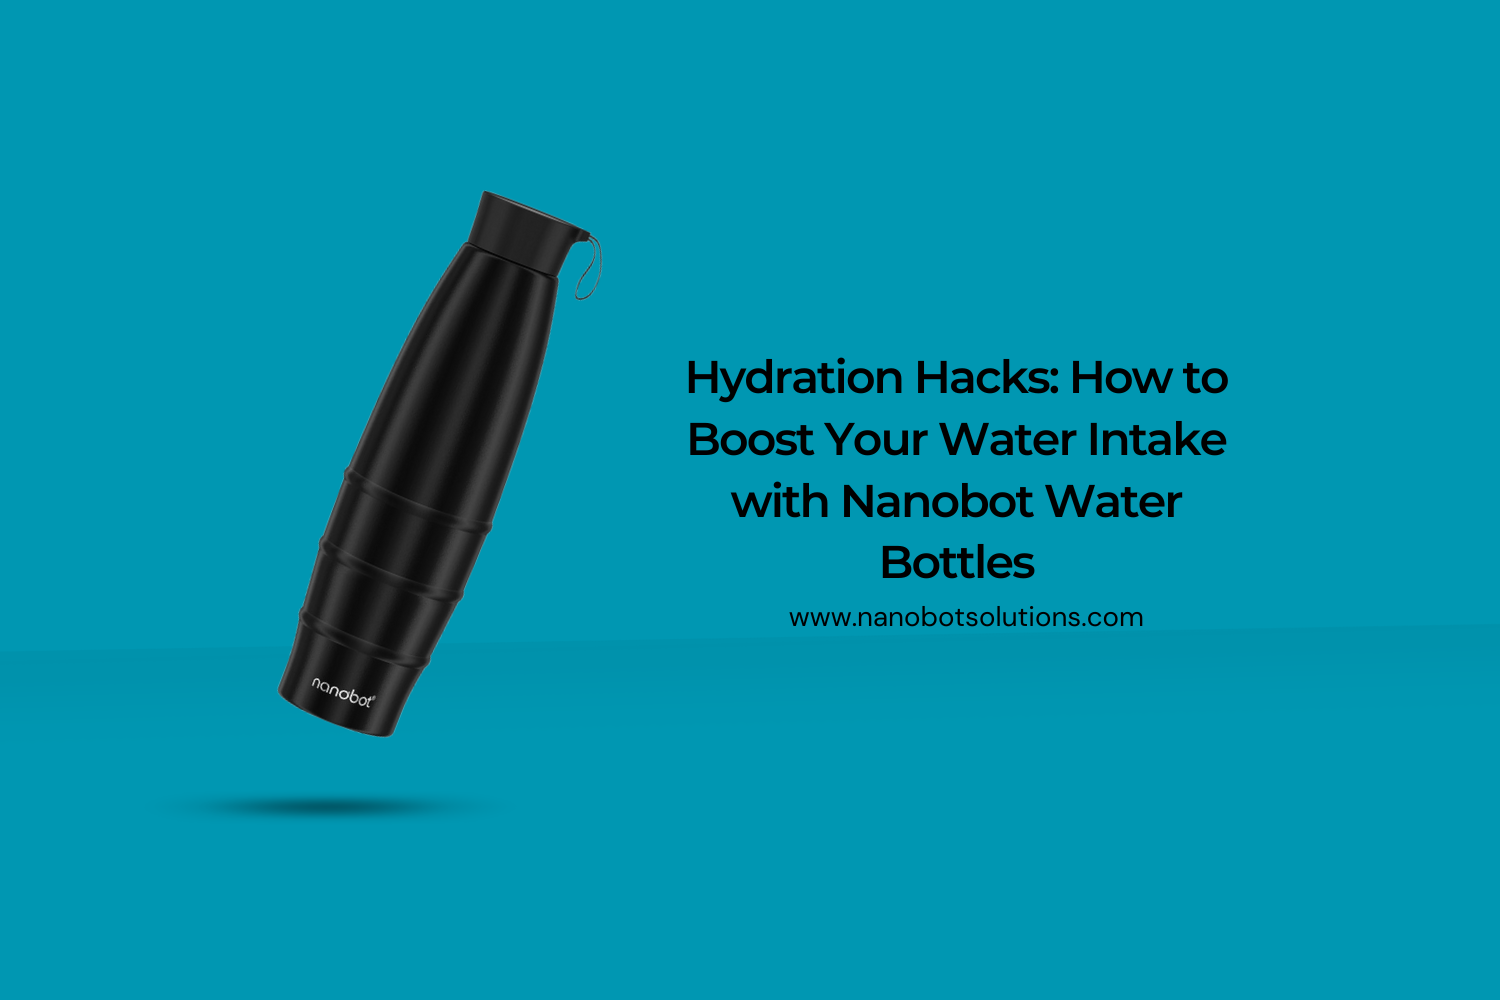 Hydration Hacks How to Boost Your Water Intake with Nanobot Water Bottles